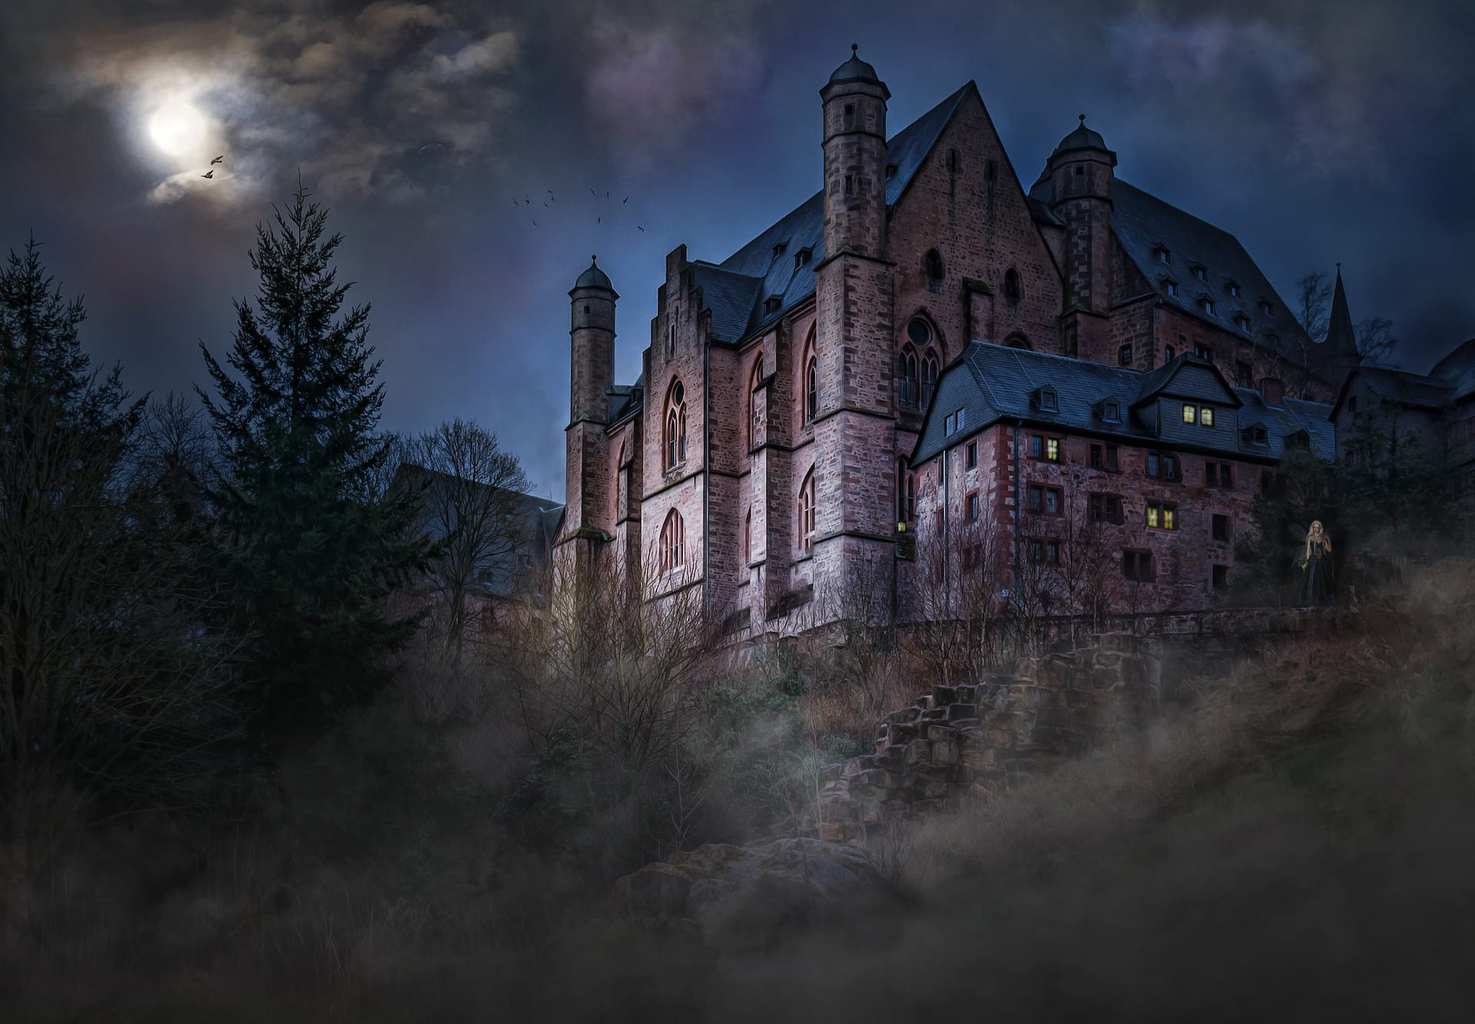 most haunted places in Europe